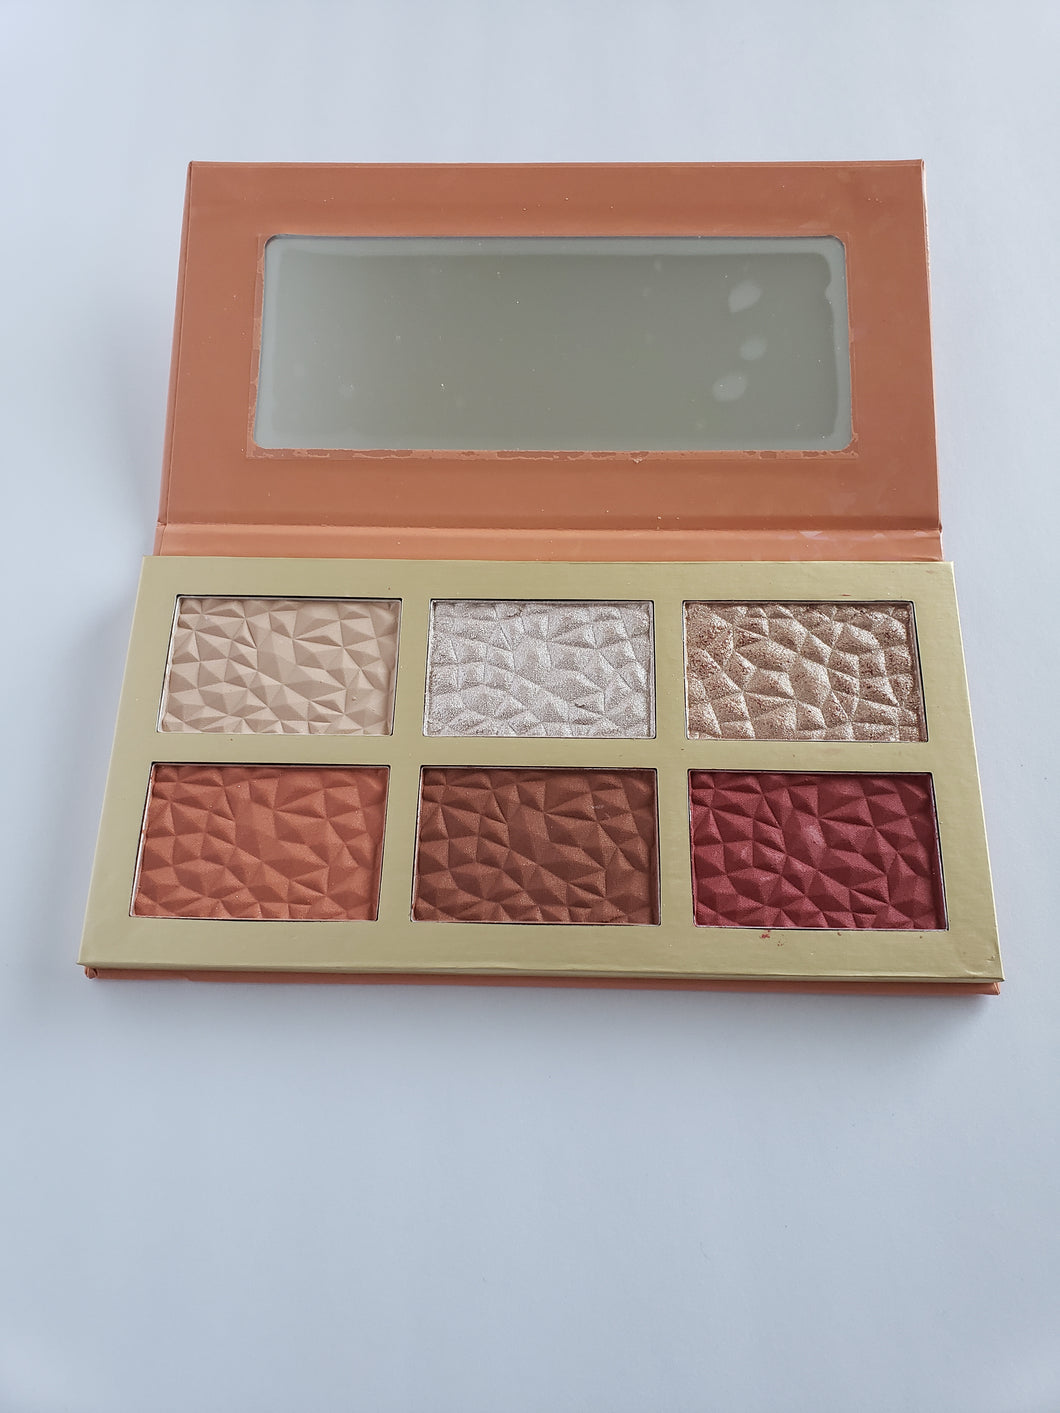 Highlighter/Contour Palette: The Perfect Glow